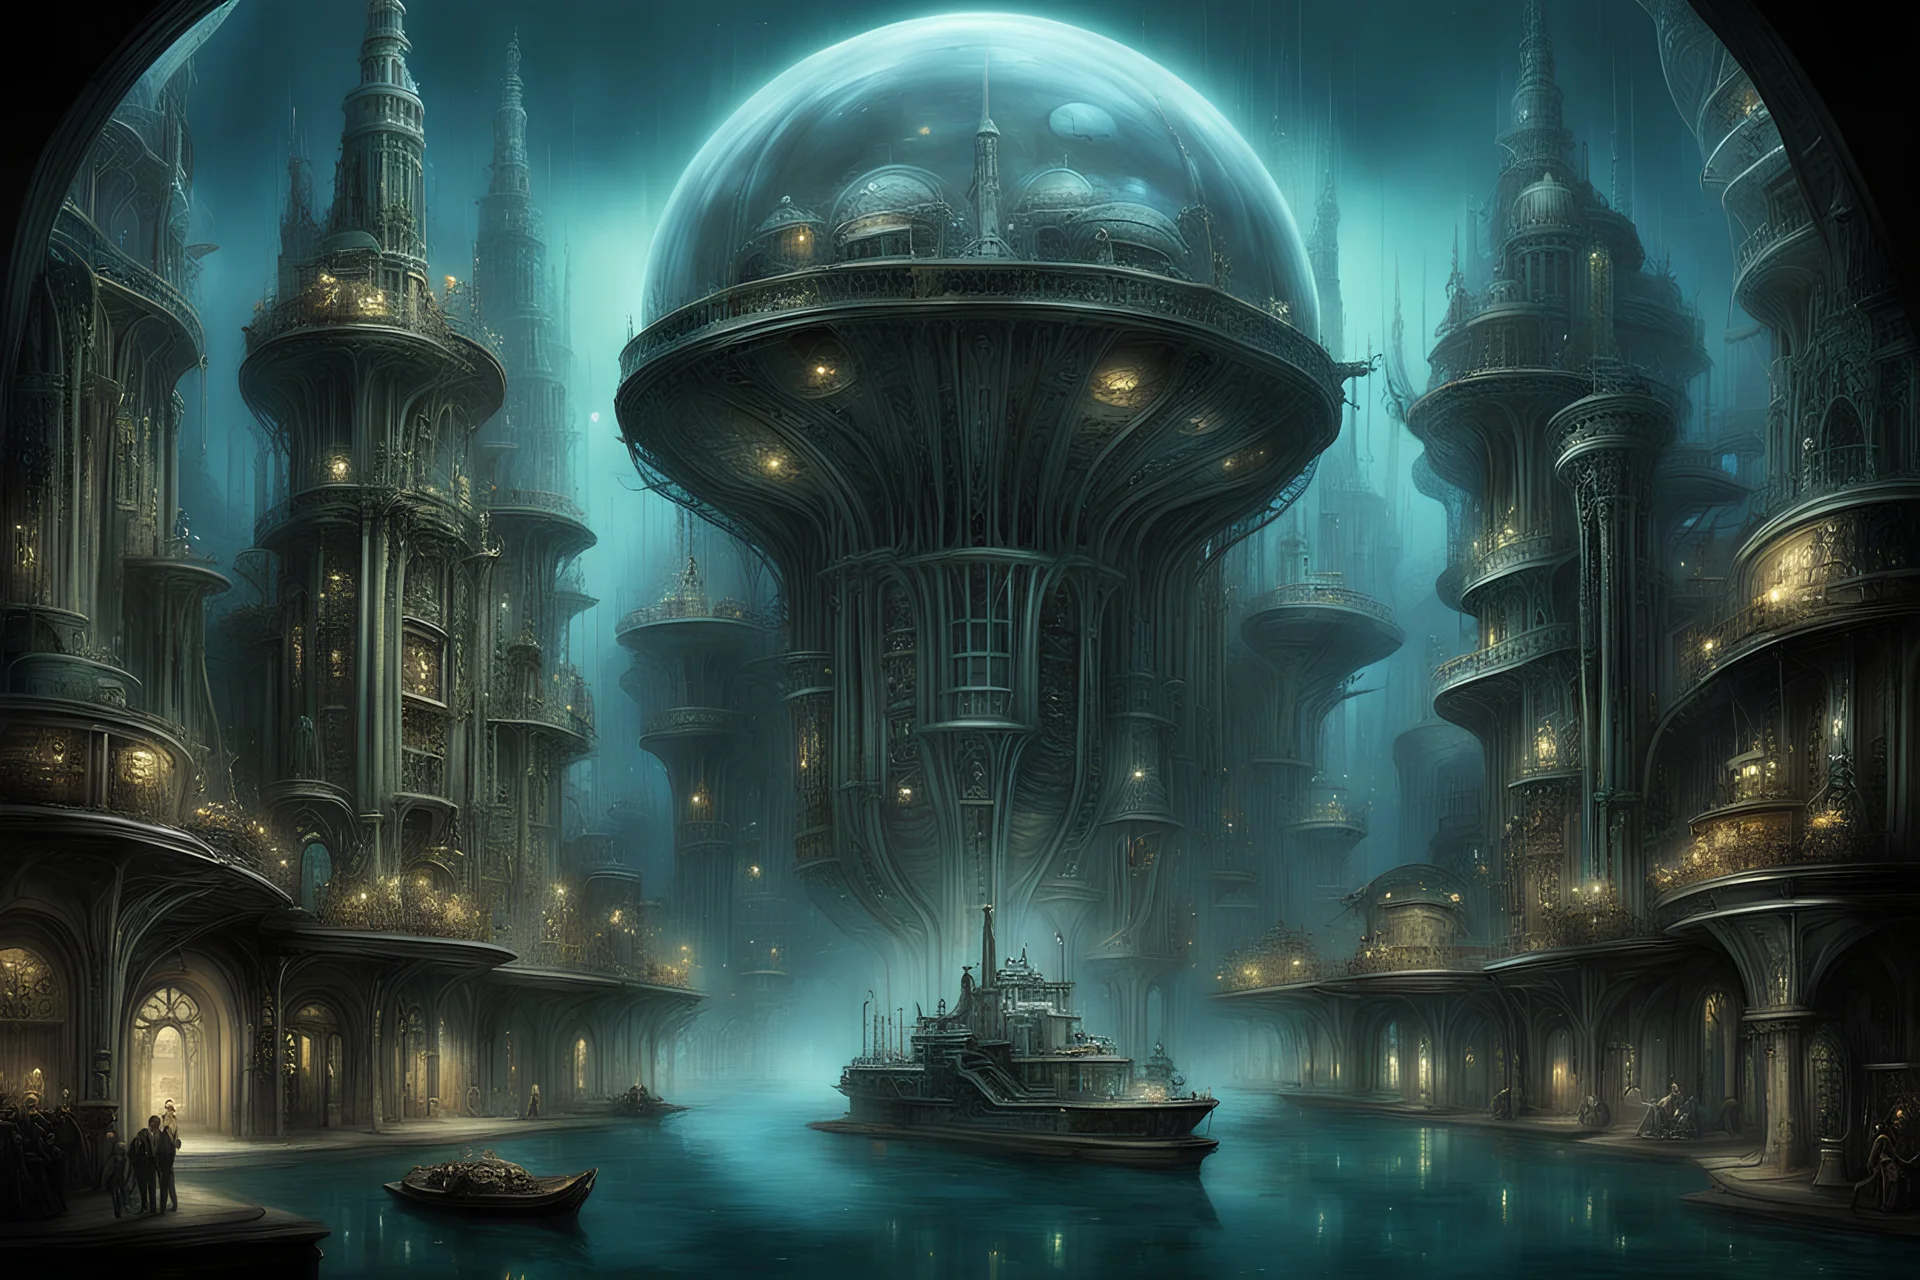 An underwater city built within colossal glass domes, with Victorian-era architecture and clockwork submarines navigating through schools of fish. The city's skyline is illuminated by glowing bioluminescent plants and steampunk gadgets. by H.R. Giger